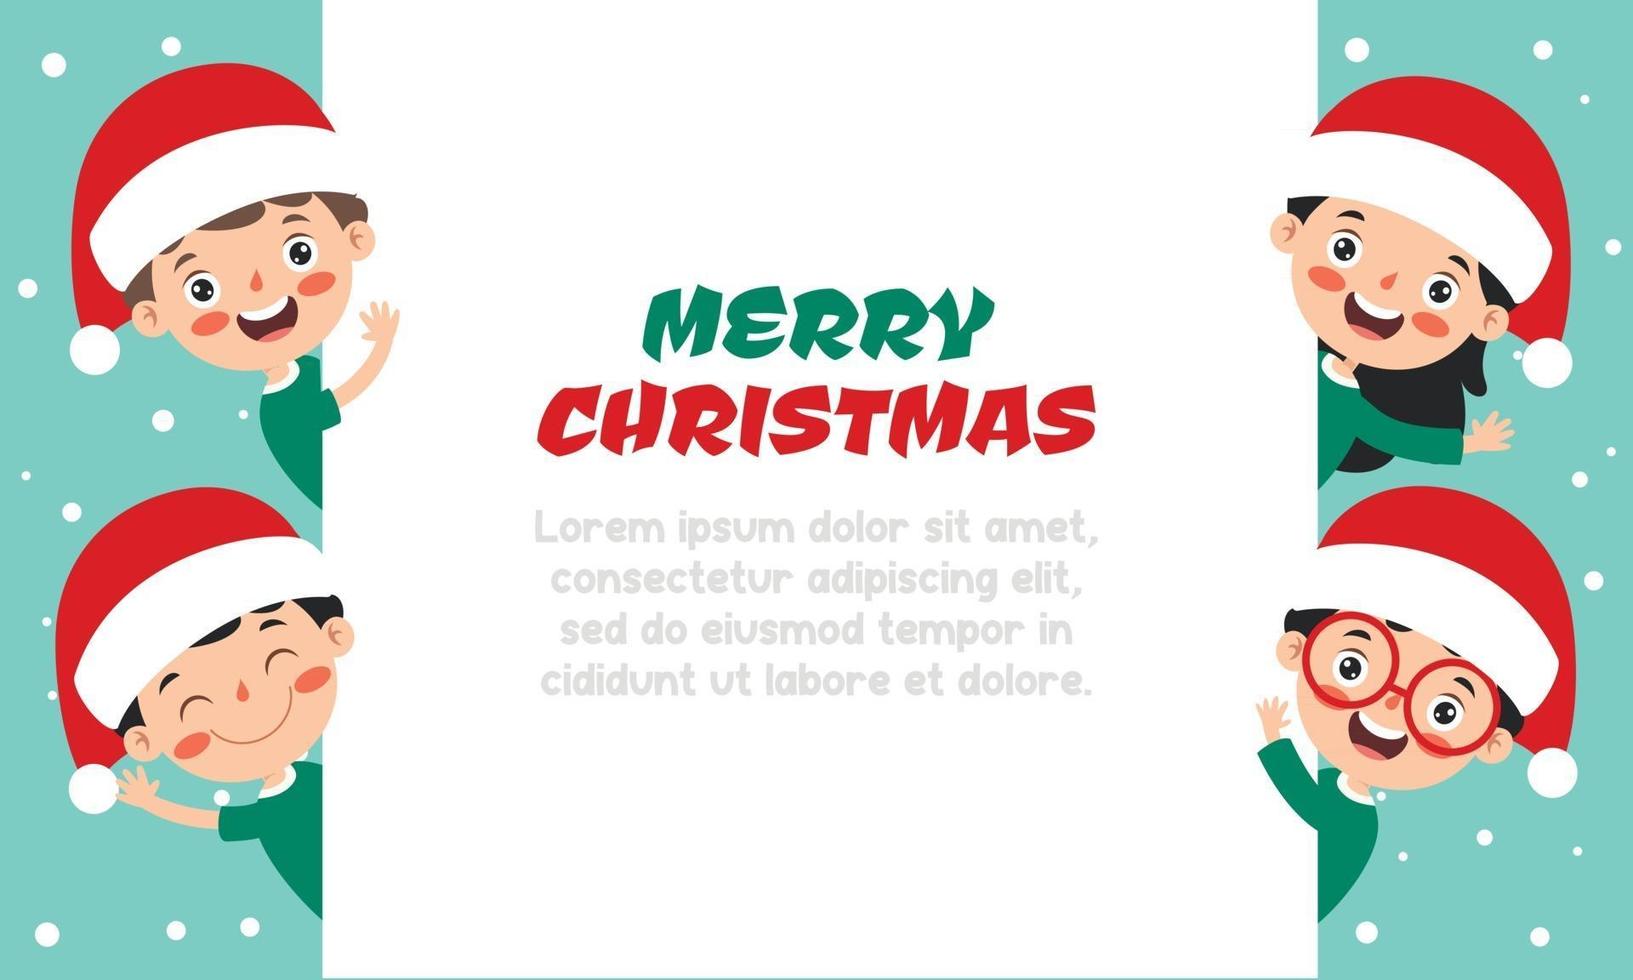 Christmas Card Design With Funny Characters vector